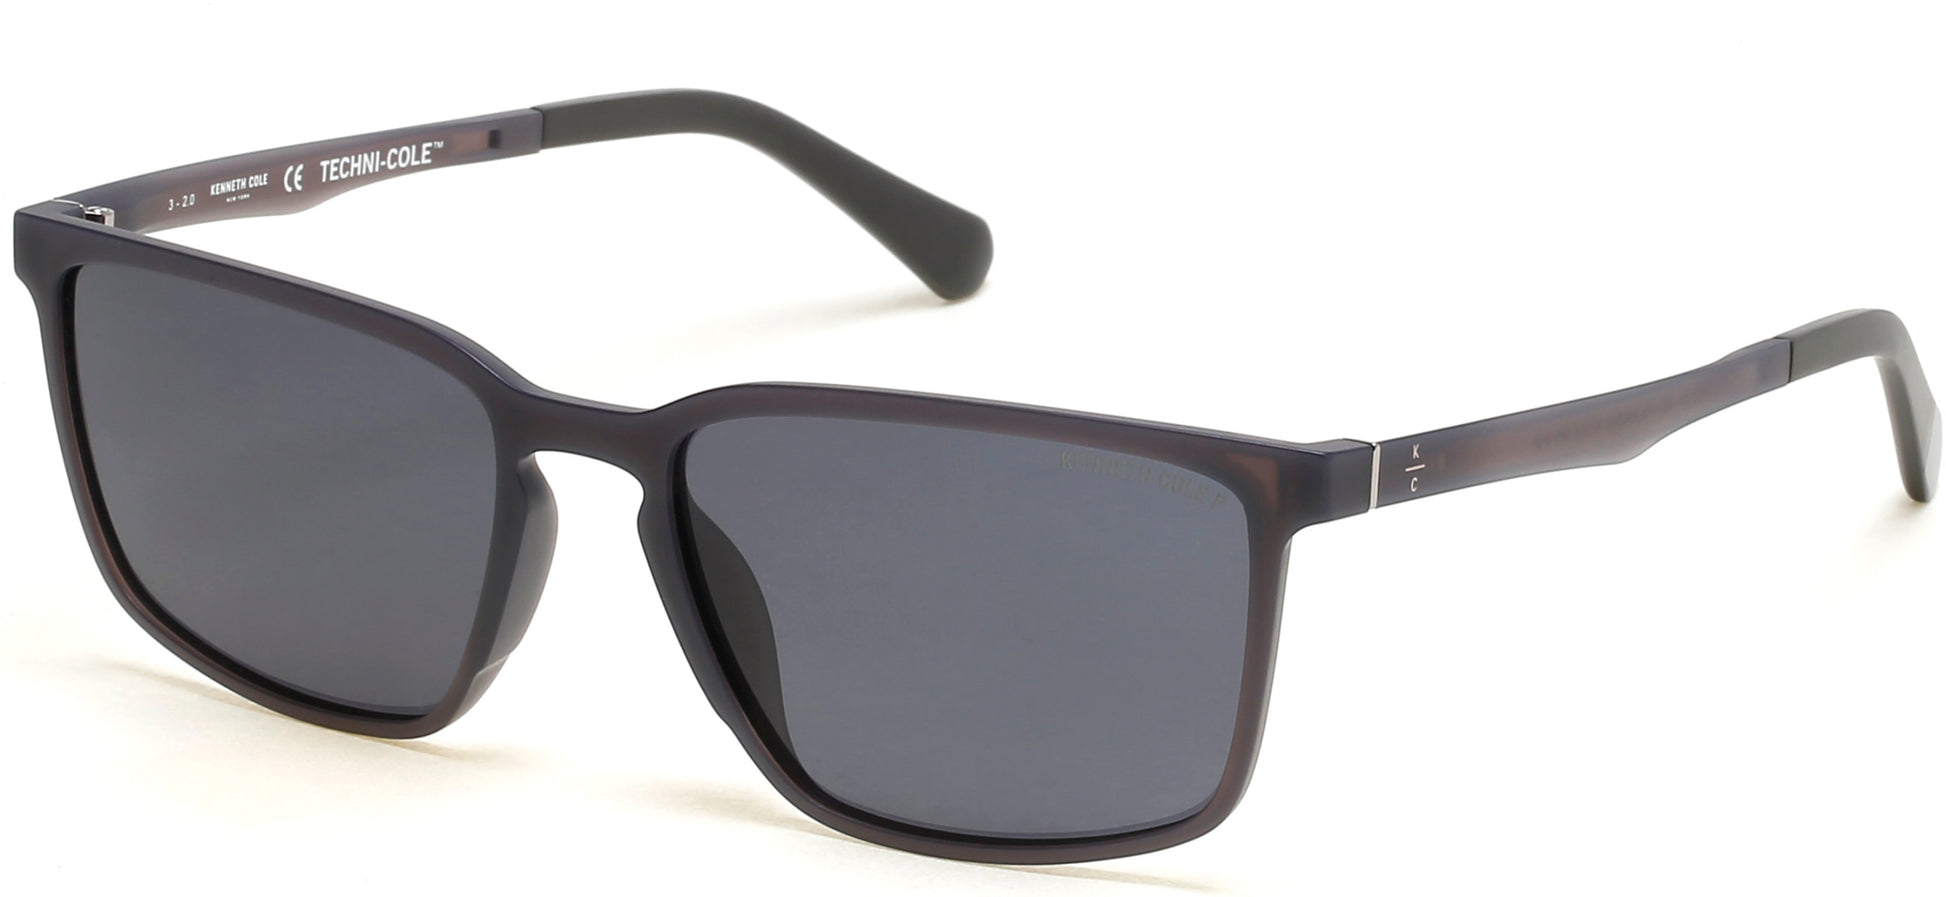 Kenneth Cole New York,Kenneth Cole Reaction KC7251 Square Sunglasses 20D-20D - Grey / Smoke Polarized